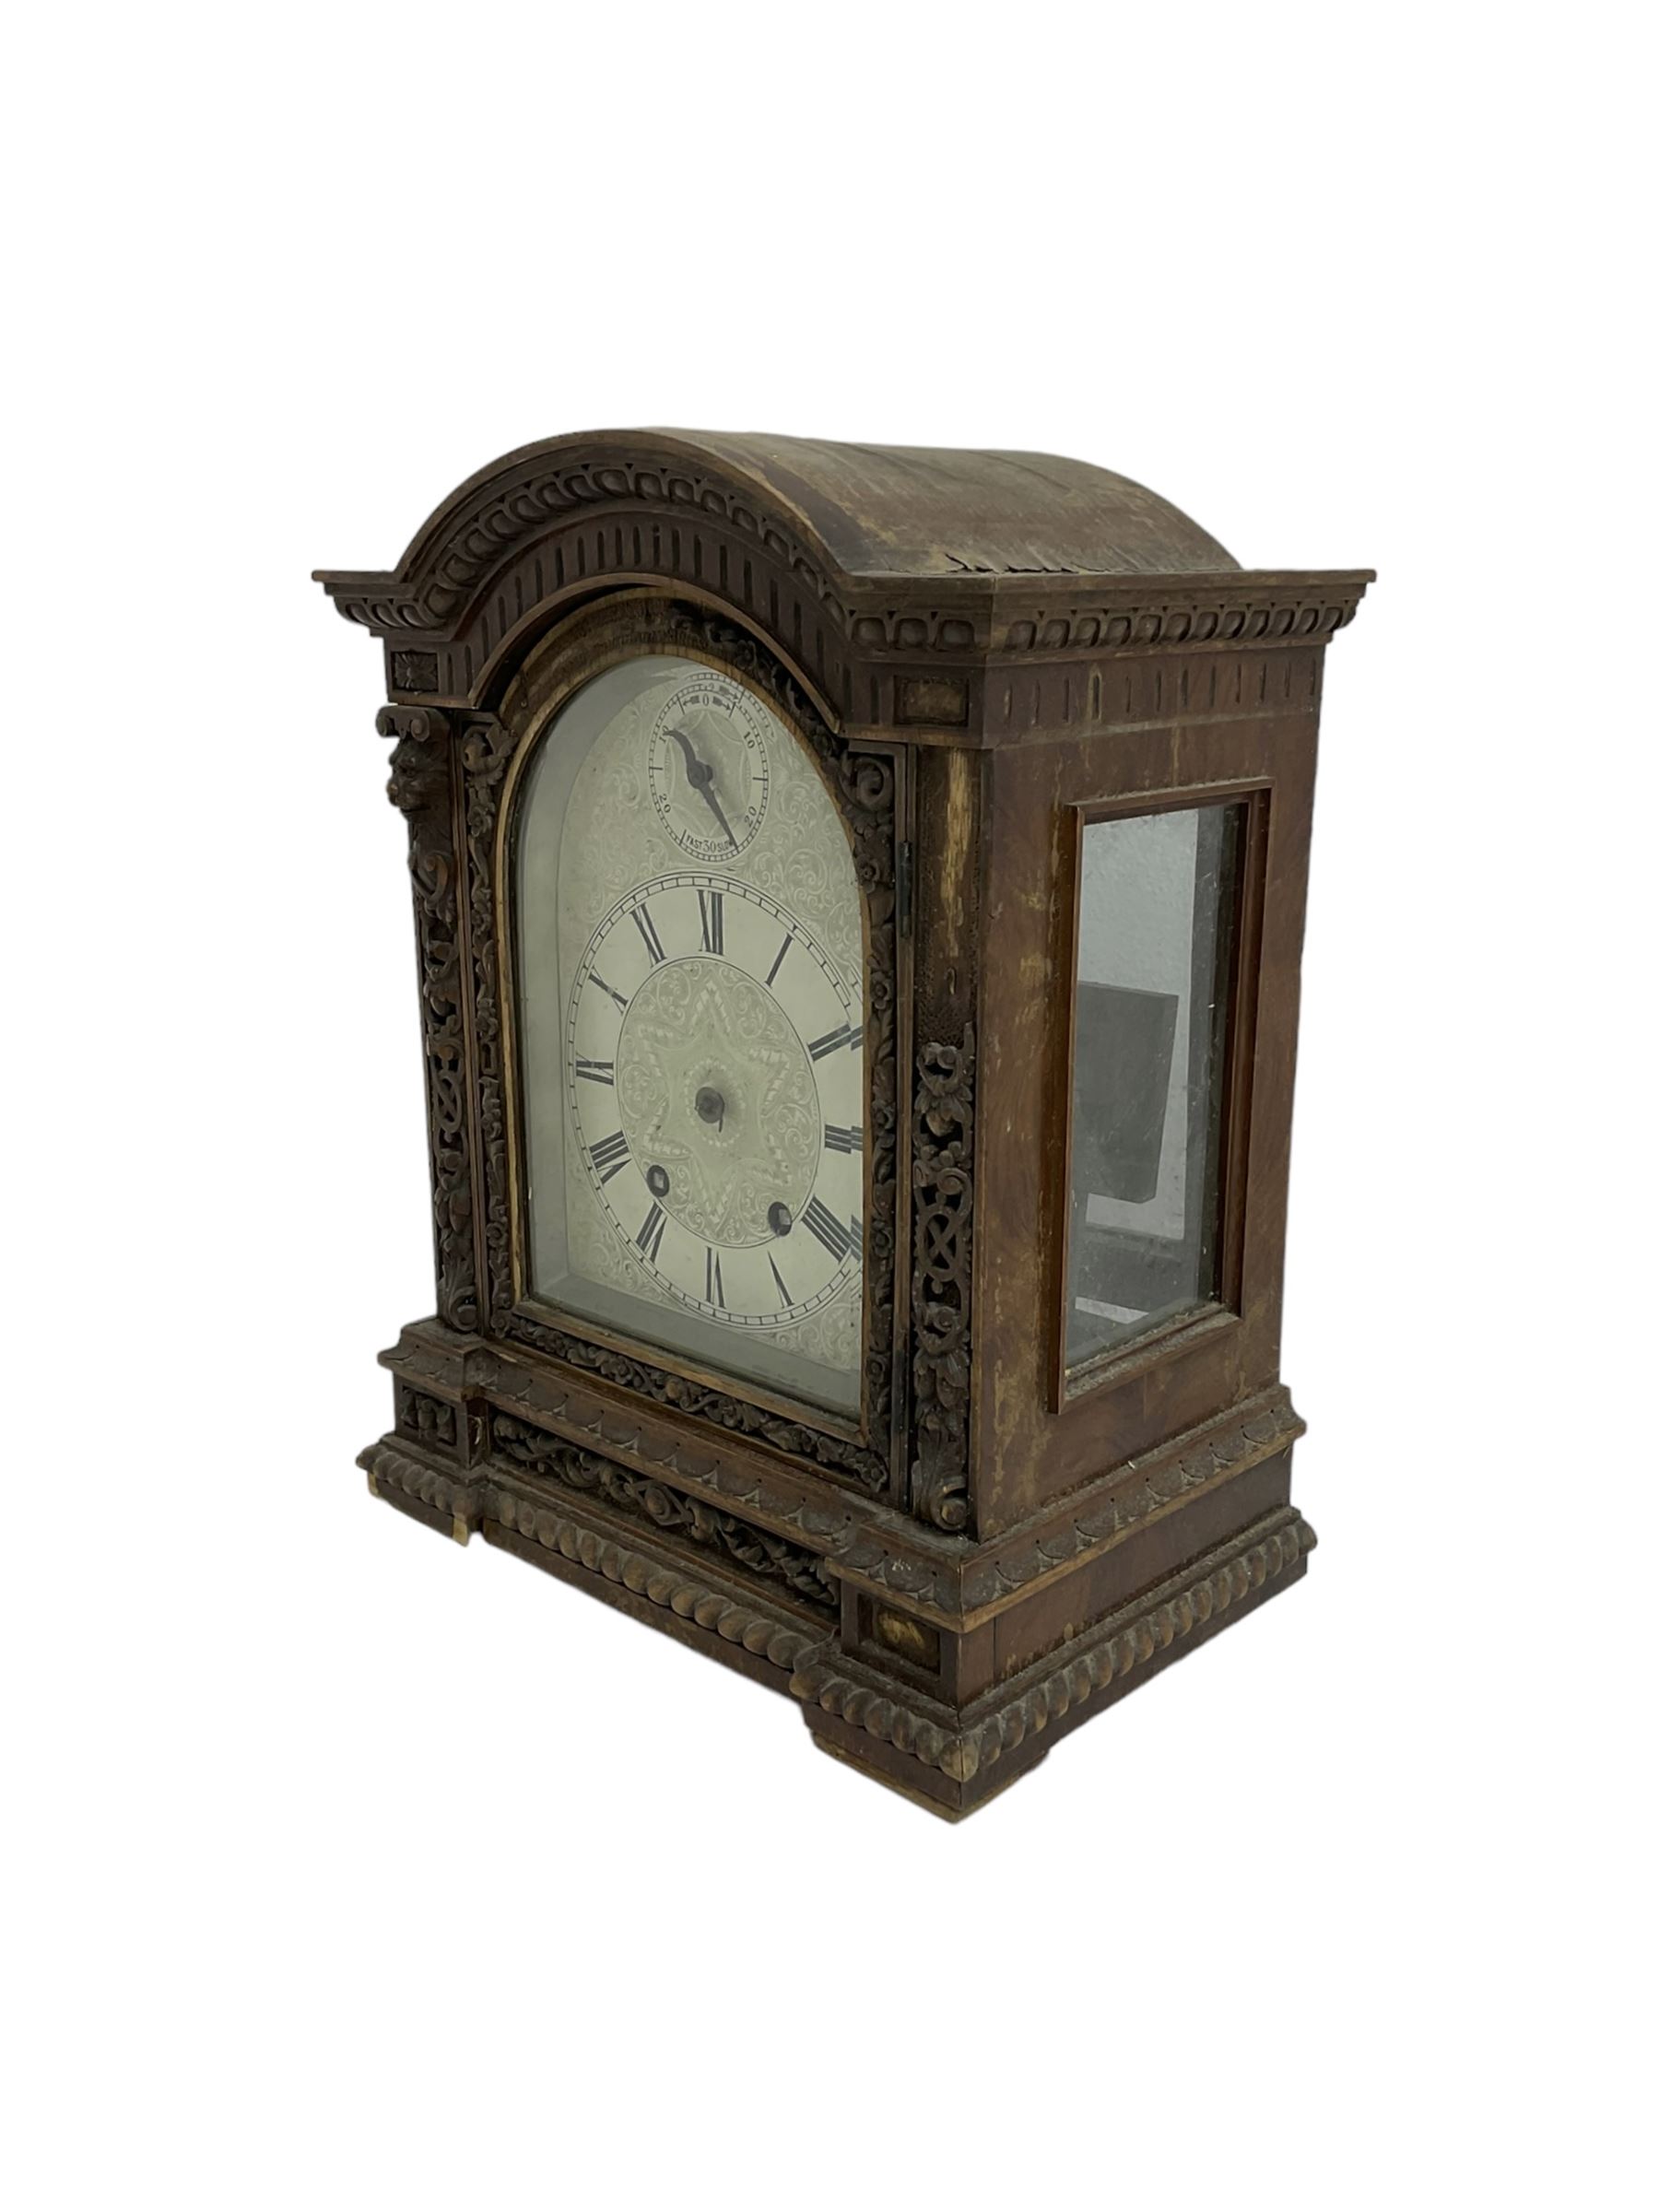 Edwardian German mantle clock striking the hours and half hours on two coiled gongs - Image 2 of 3